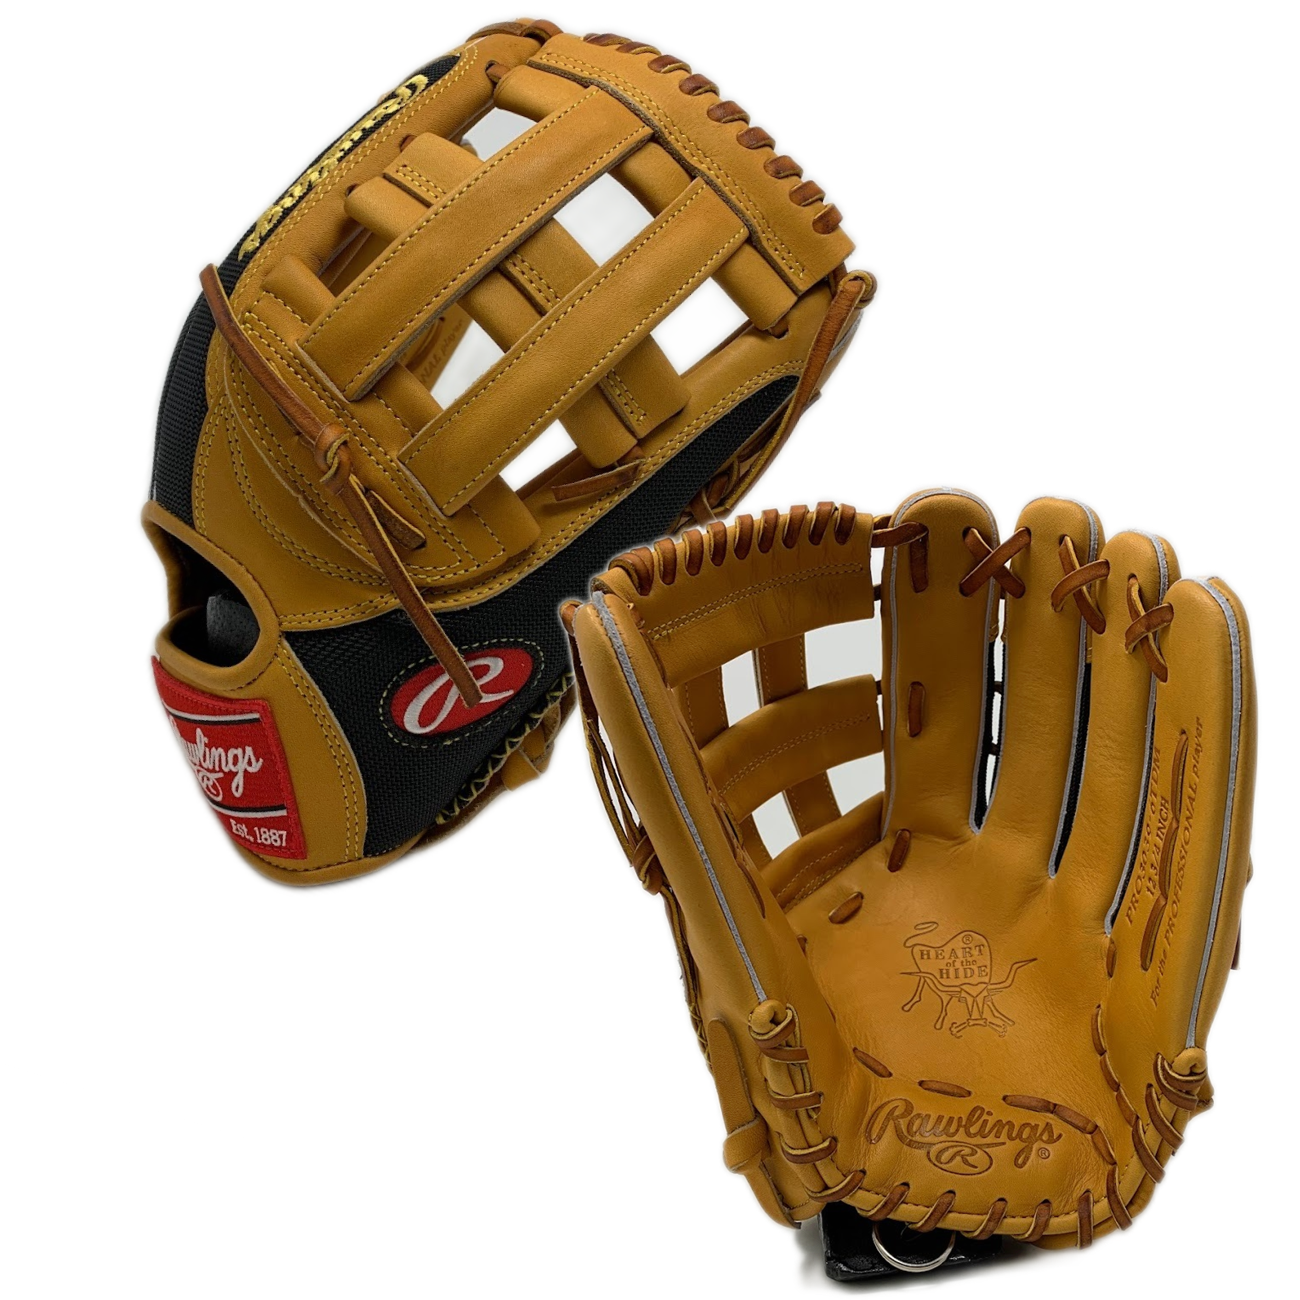 rawlings-heart-of-the-hide-12-75-inch-baseball-glove-303-deco-mesh-pro-h-web-right-hand-throw PRO3039-6TDM-RightHandThrow Rawlings  <p><strong><span style=font-size large;>Max 2 Per Customer</span></strong></p> <p><span style=font-size large;>Constructed from Rawlings